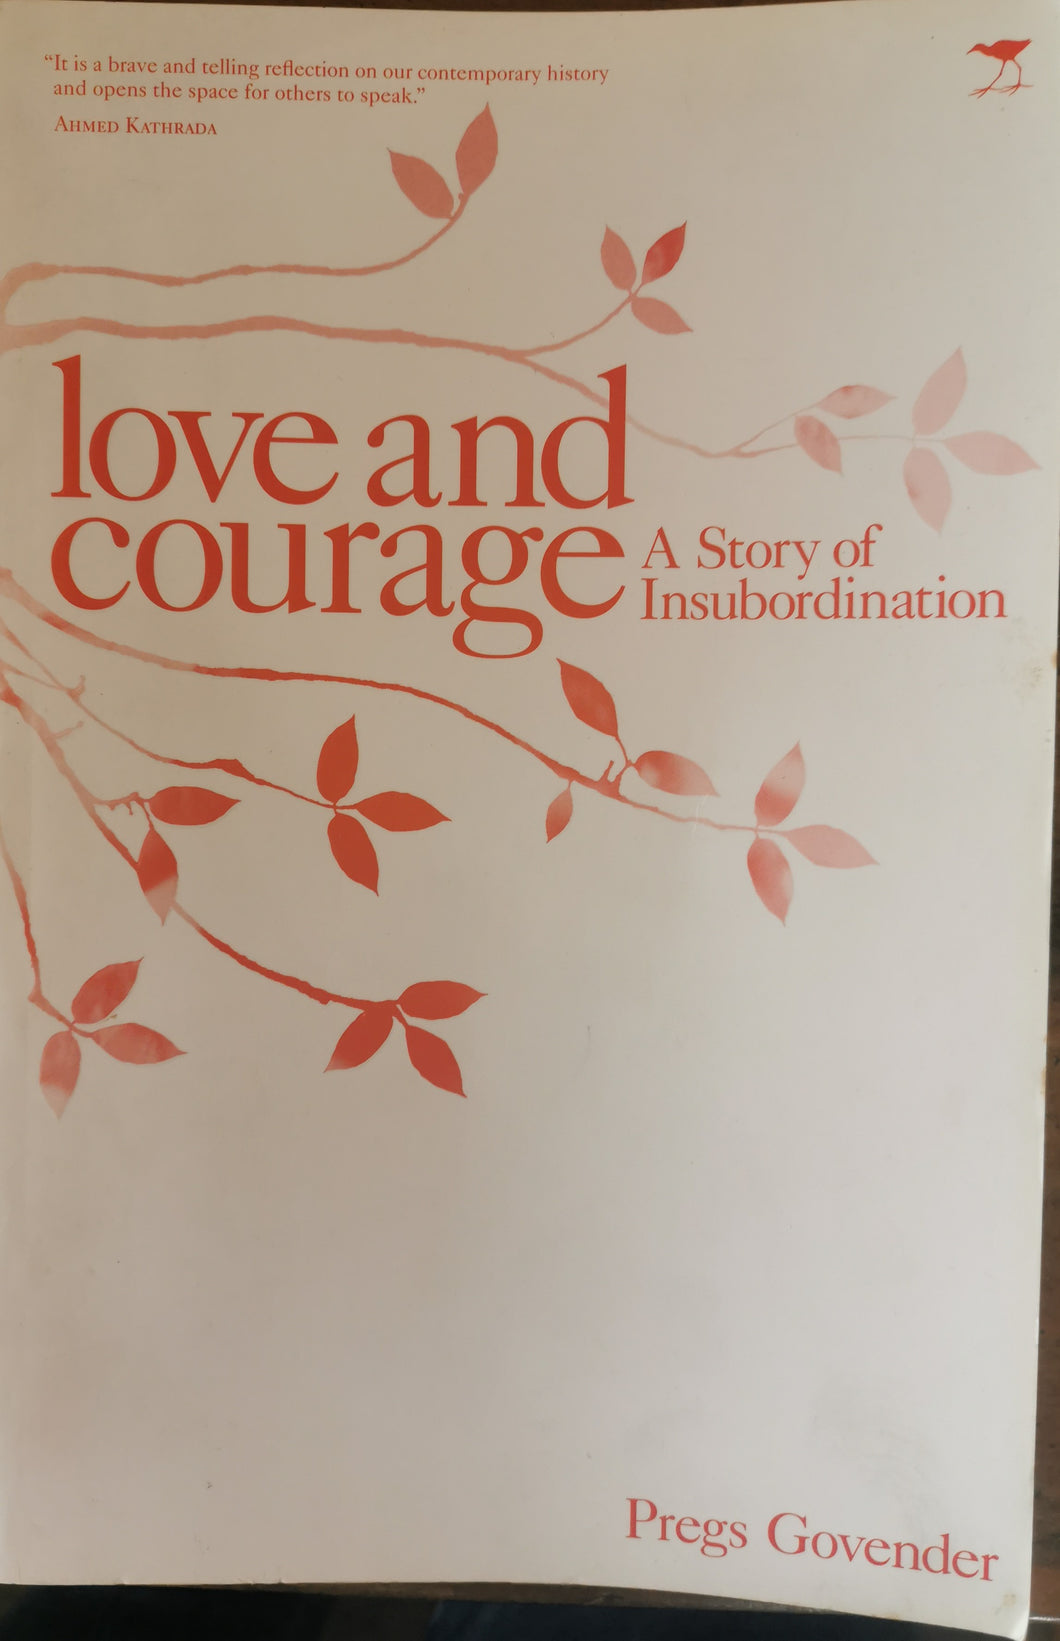 Love and Courage: A Story of Insubordination - Pregs Govender